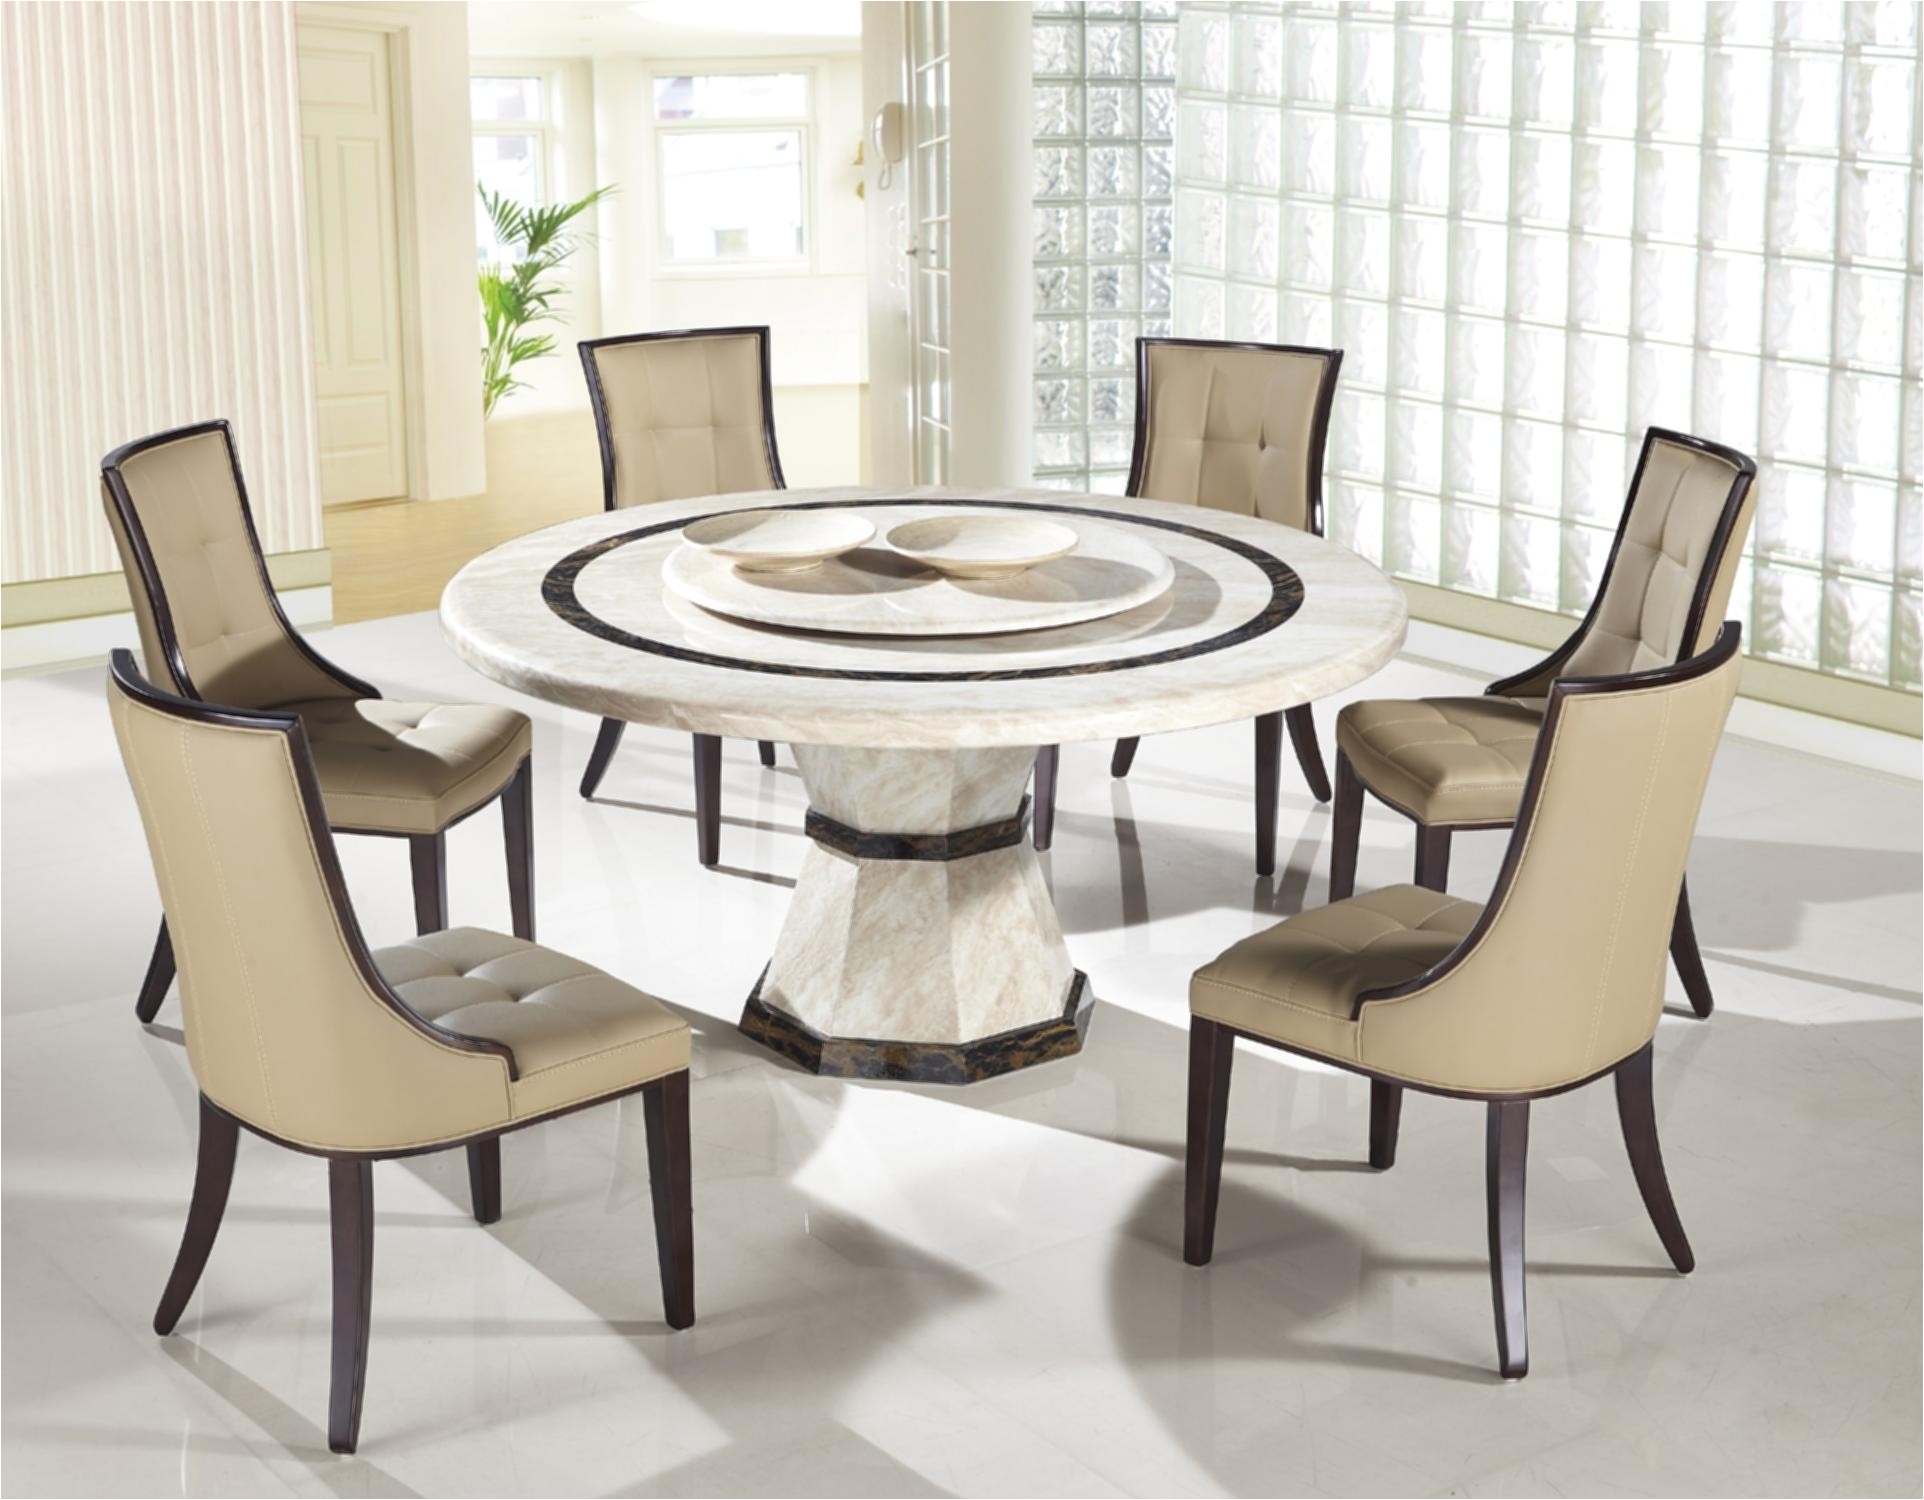 used dining table and chairs sale lovely used restoration hardware patio furniture of used dining table